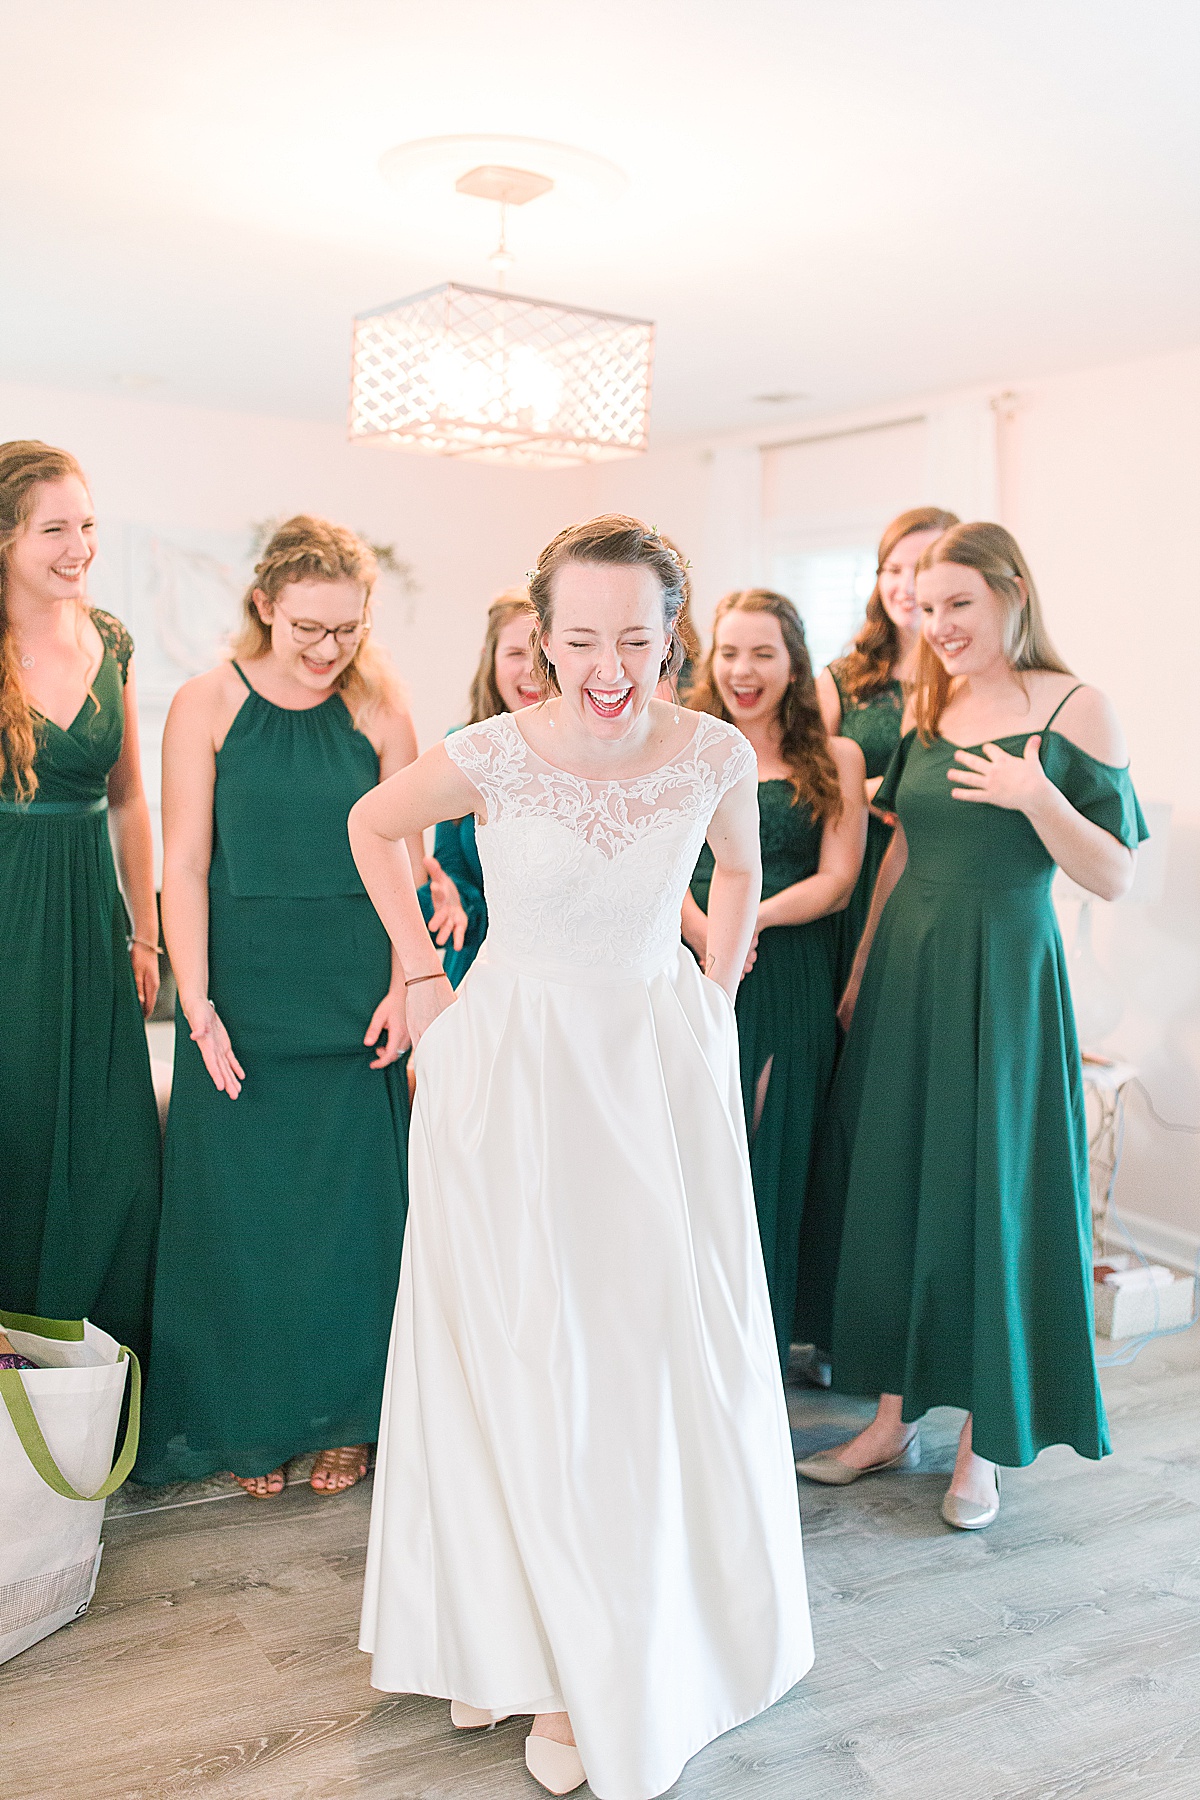 Bride Spinning around Laughing with Bridesmaids Photo 